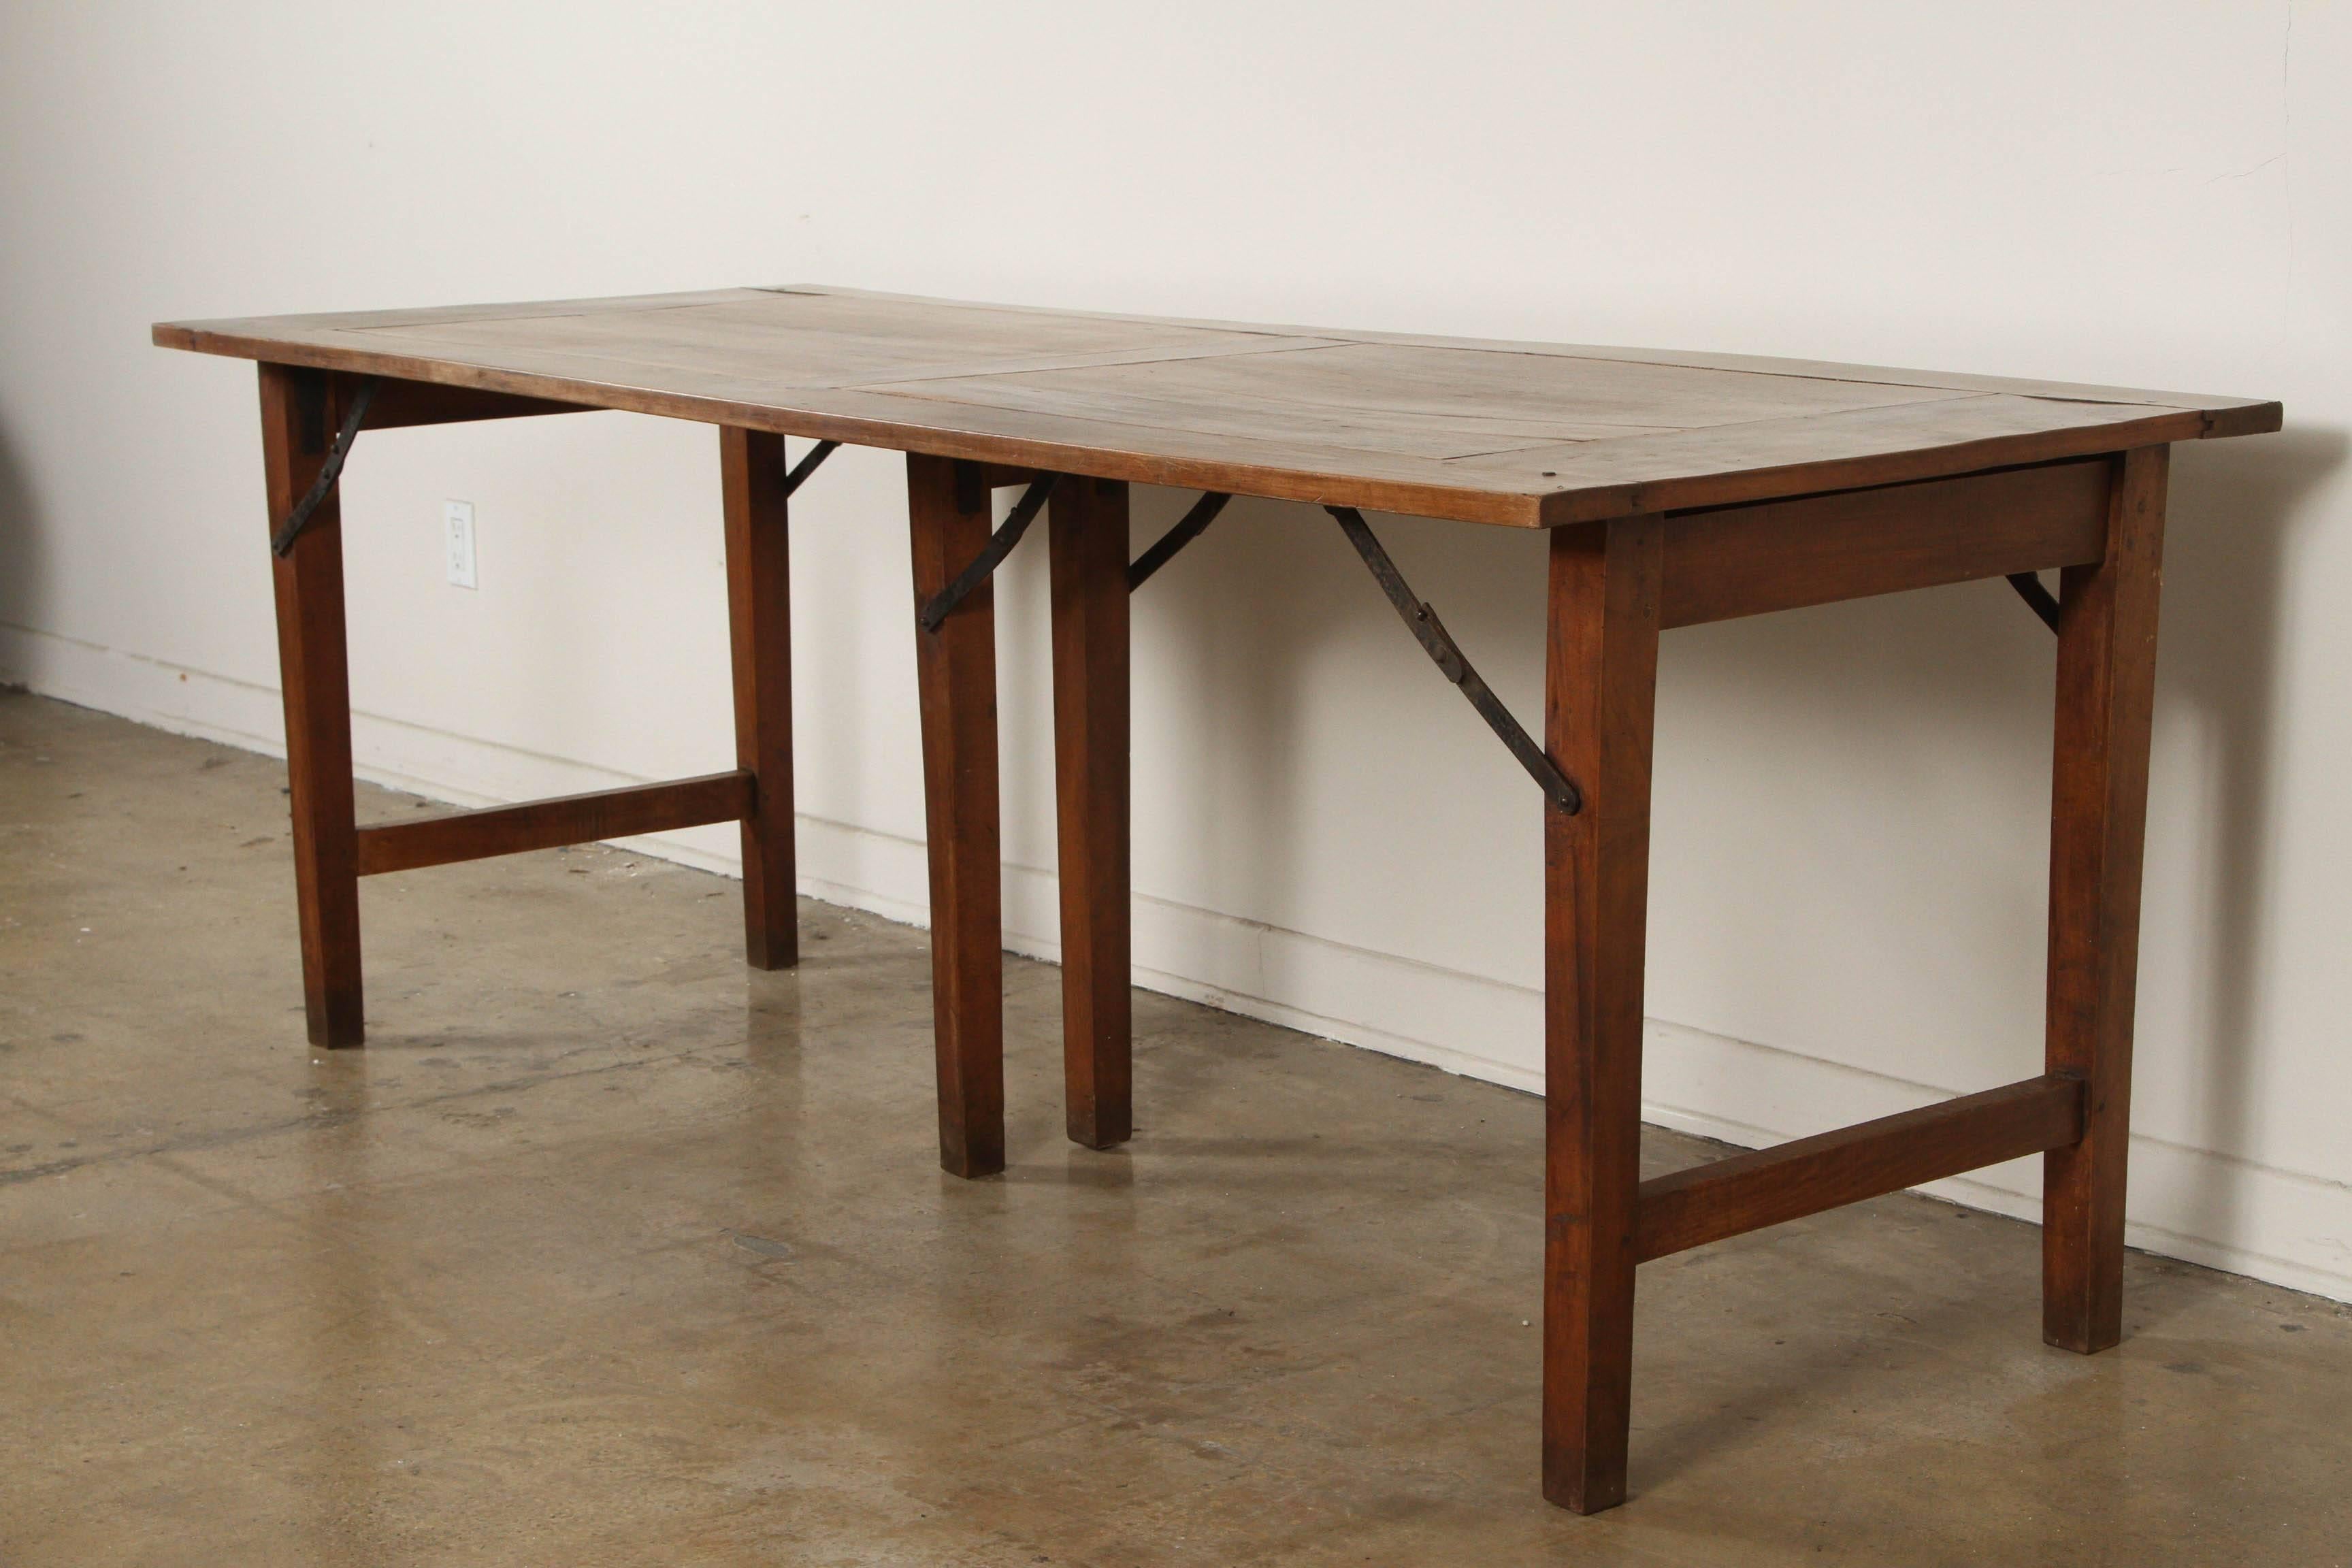 Late 19th Century French Walnut Table with Folding Legs In Excellent Condition For Sale In Los Angeles, CA